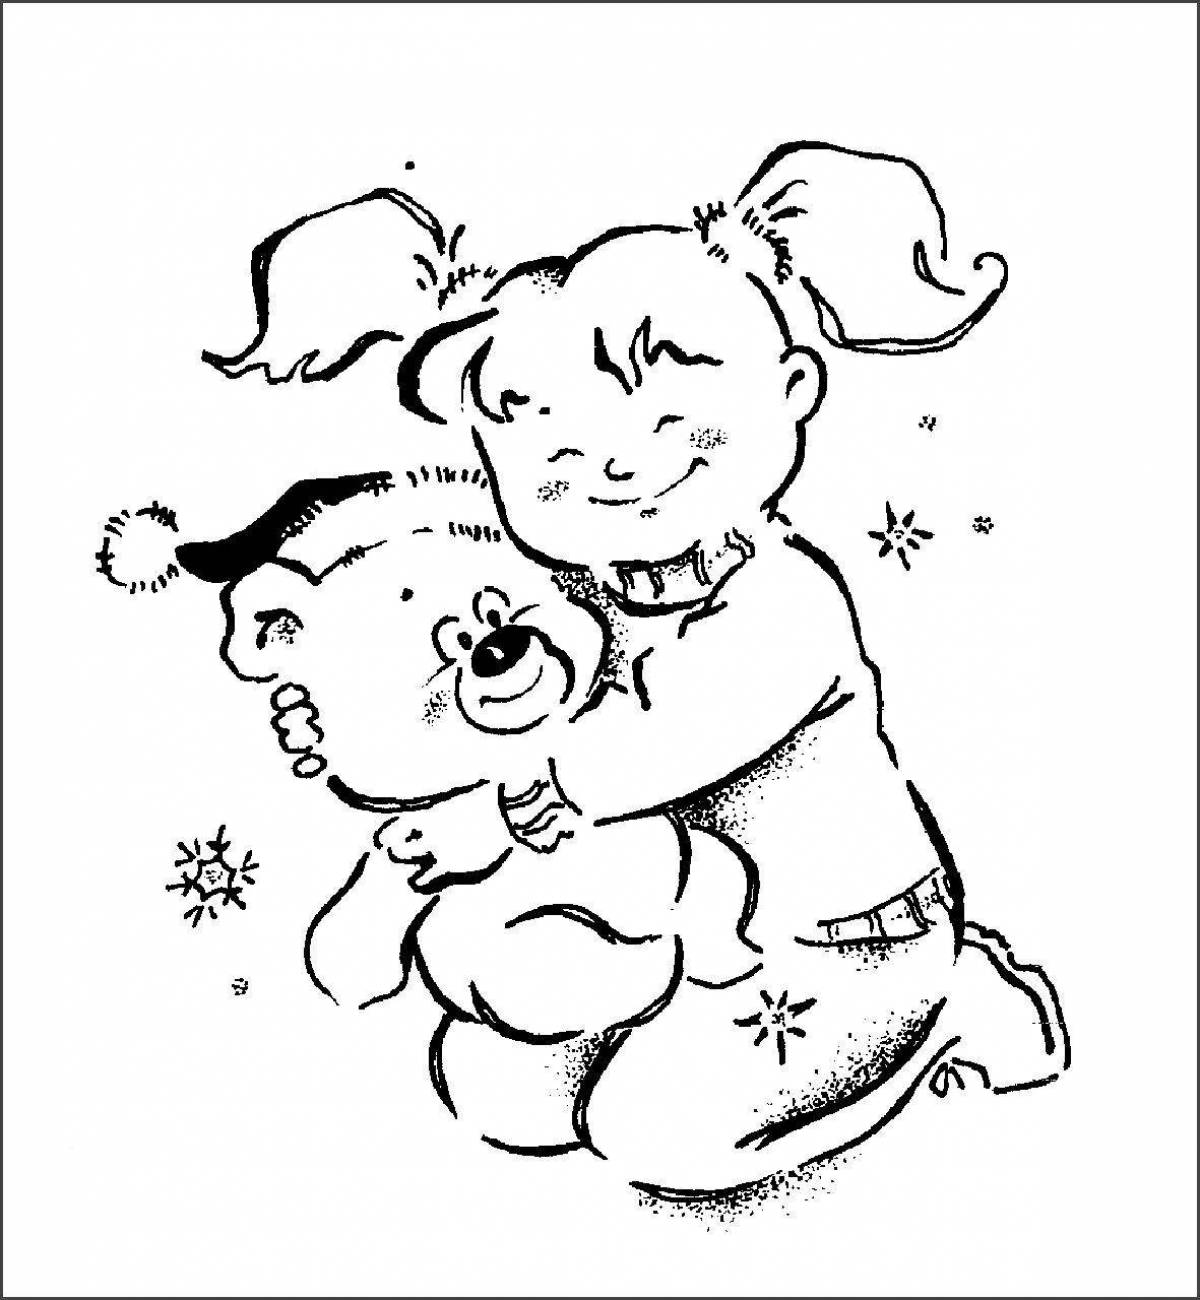 Amazing hug day coloring pages for kids